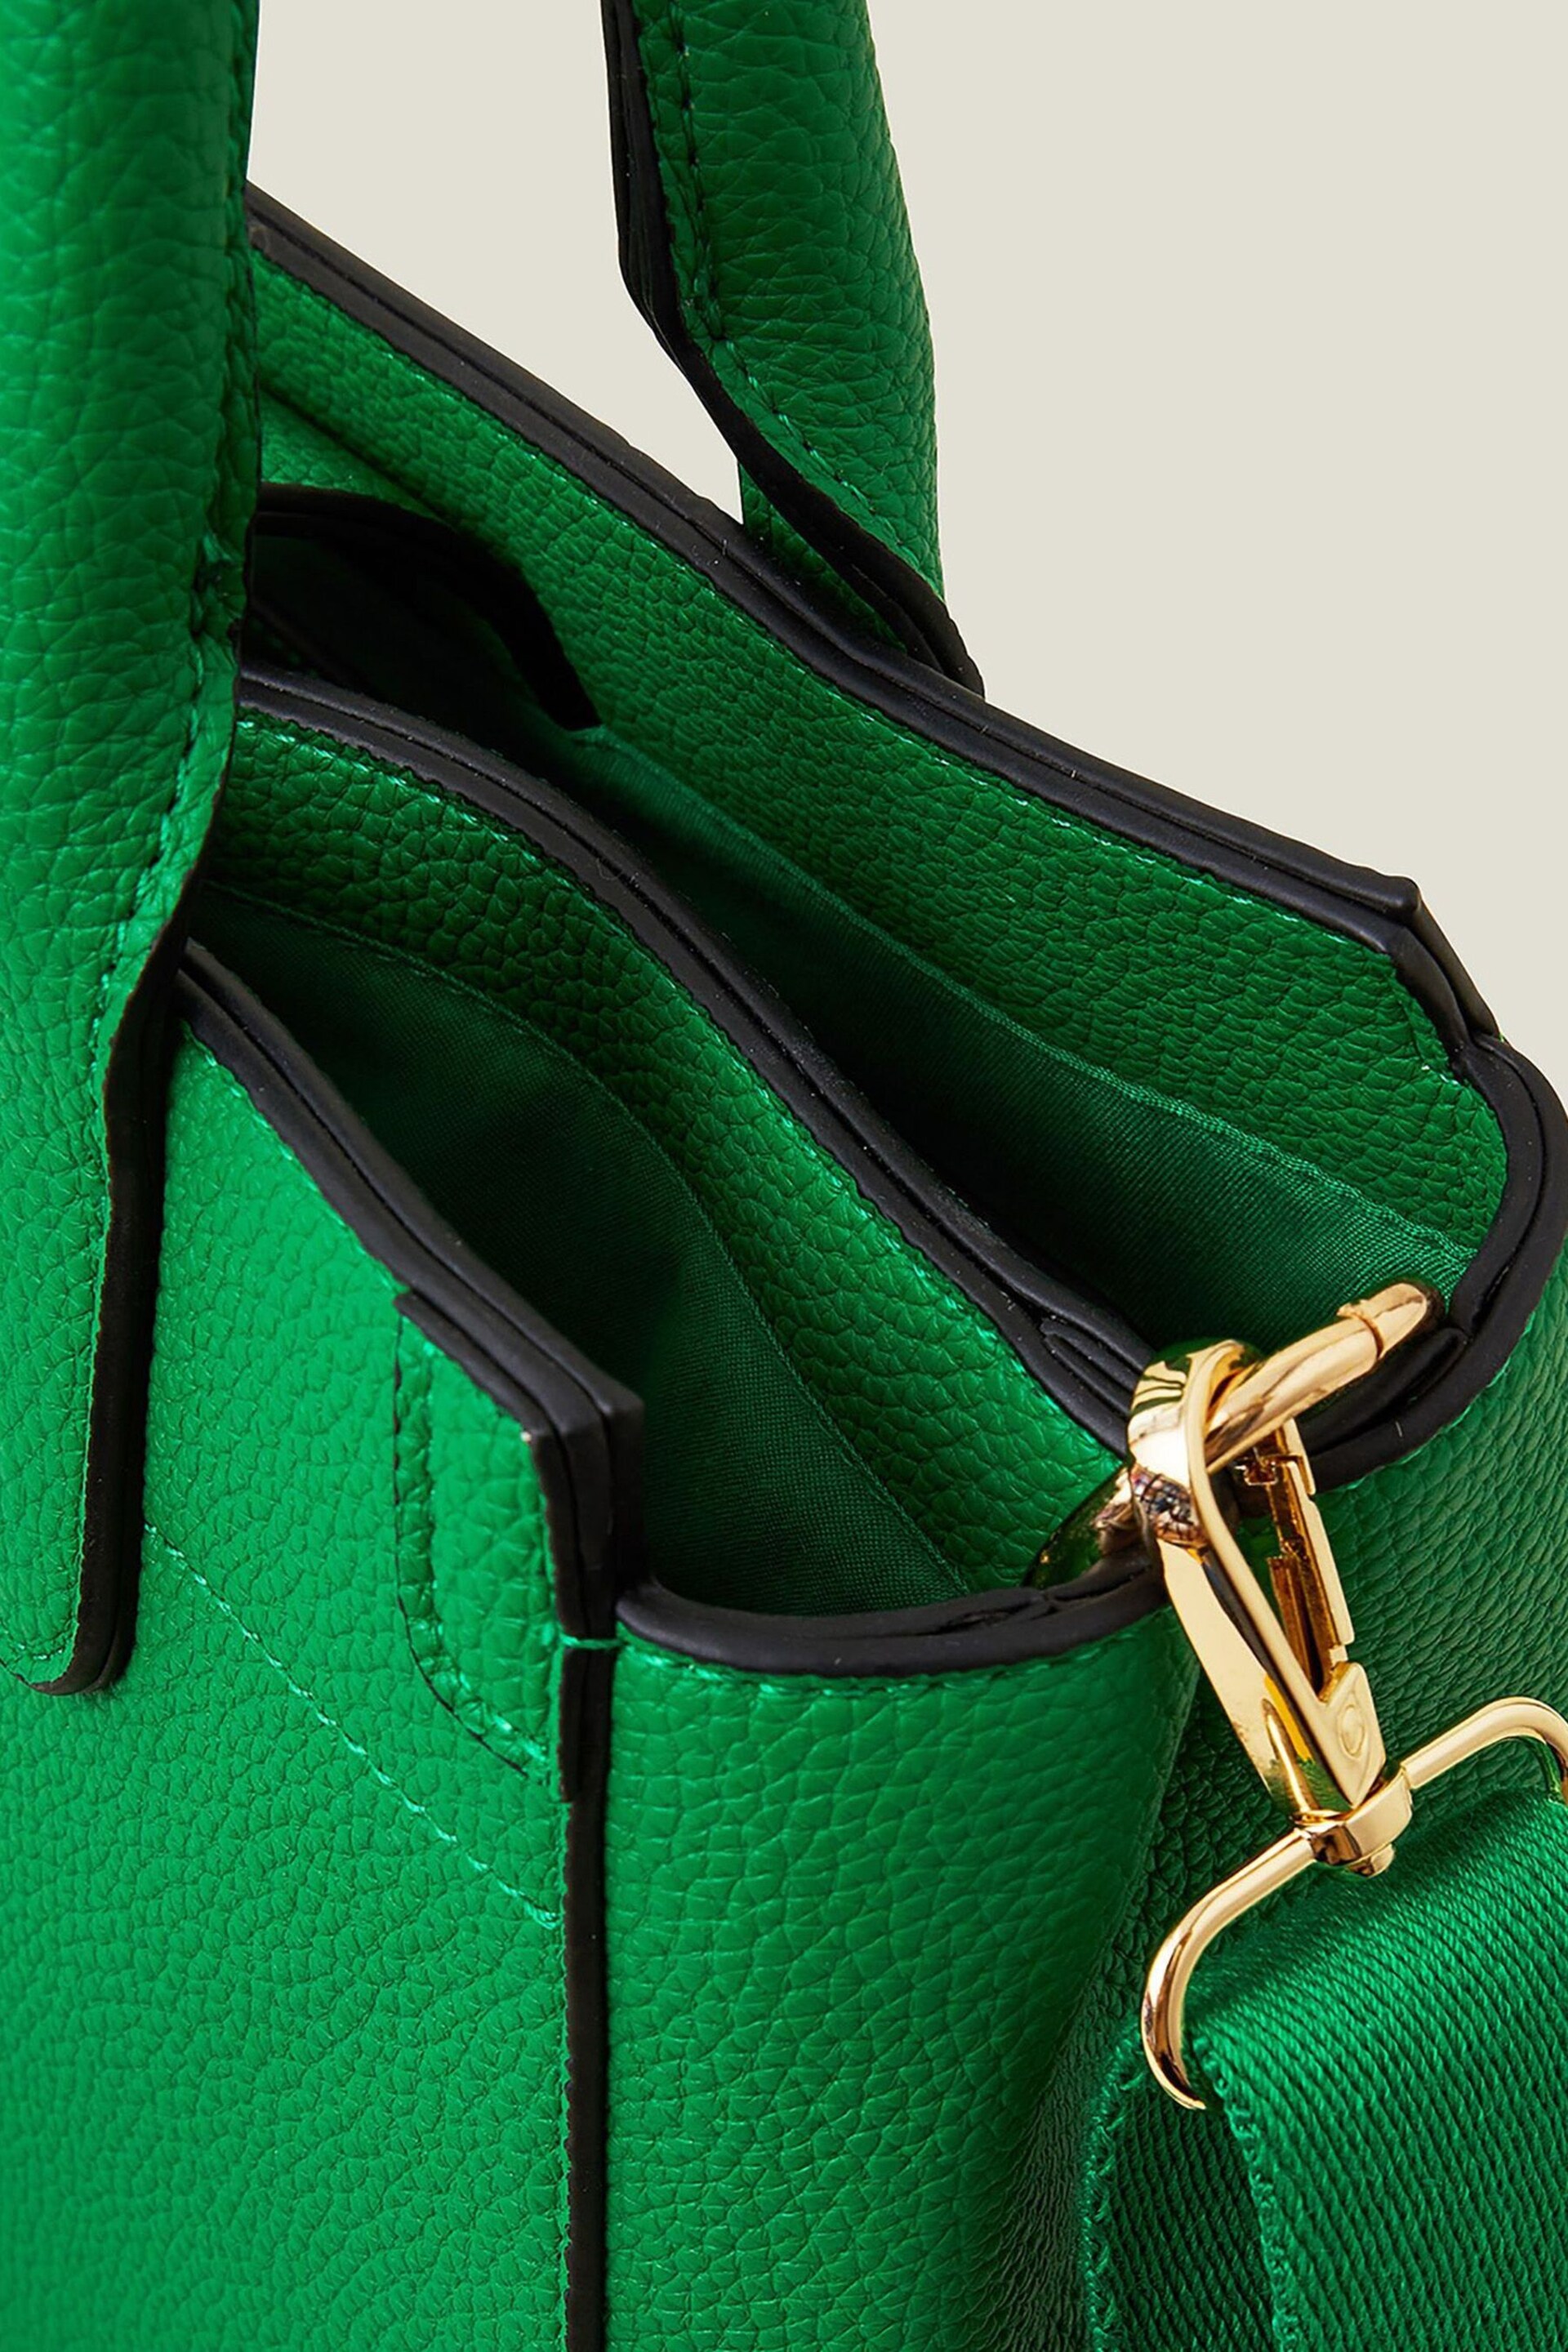 Accessorize Green Handheld Bag with Webbing Strap - Image 4 of 4